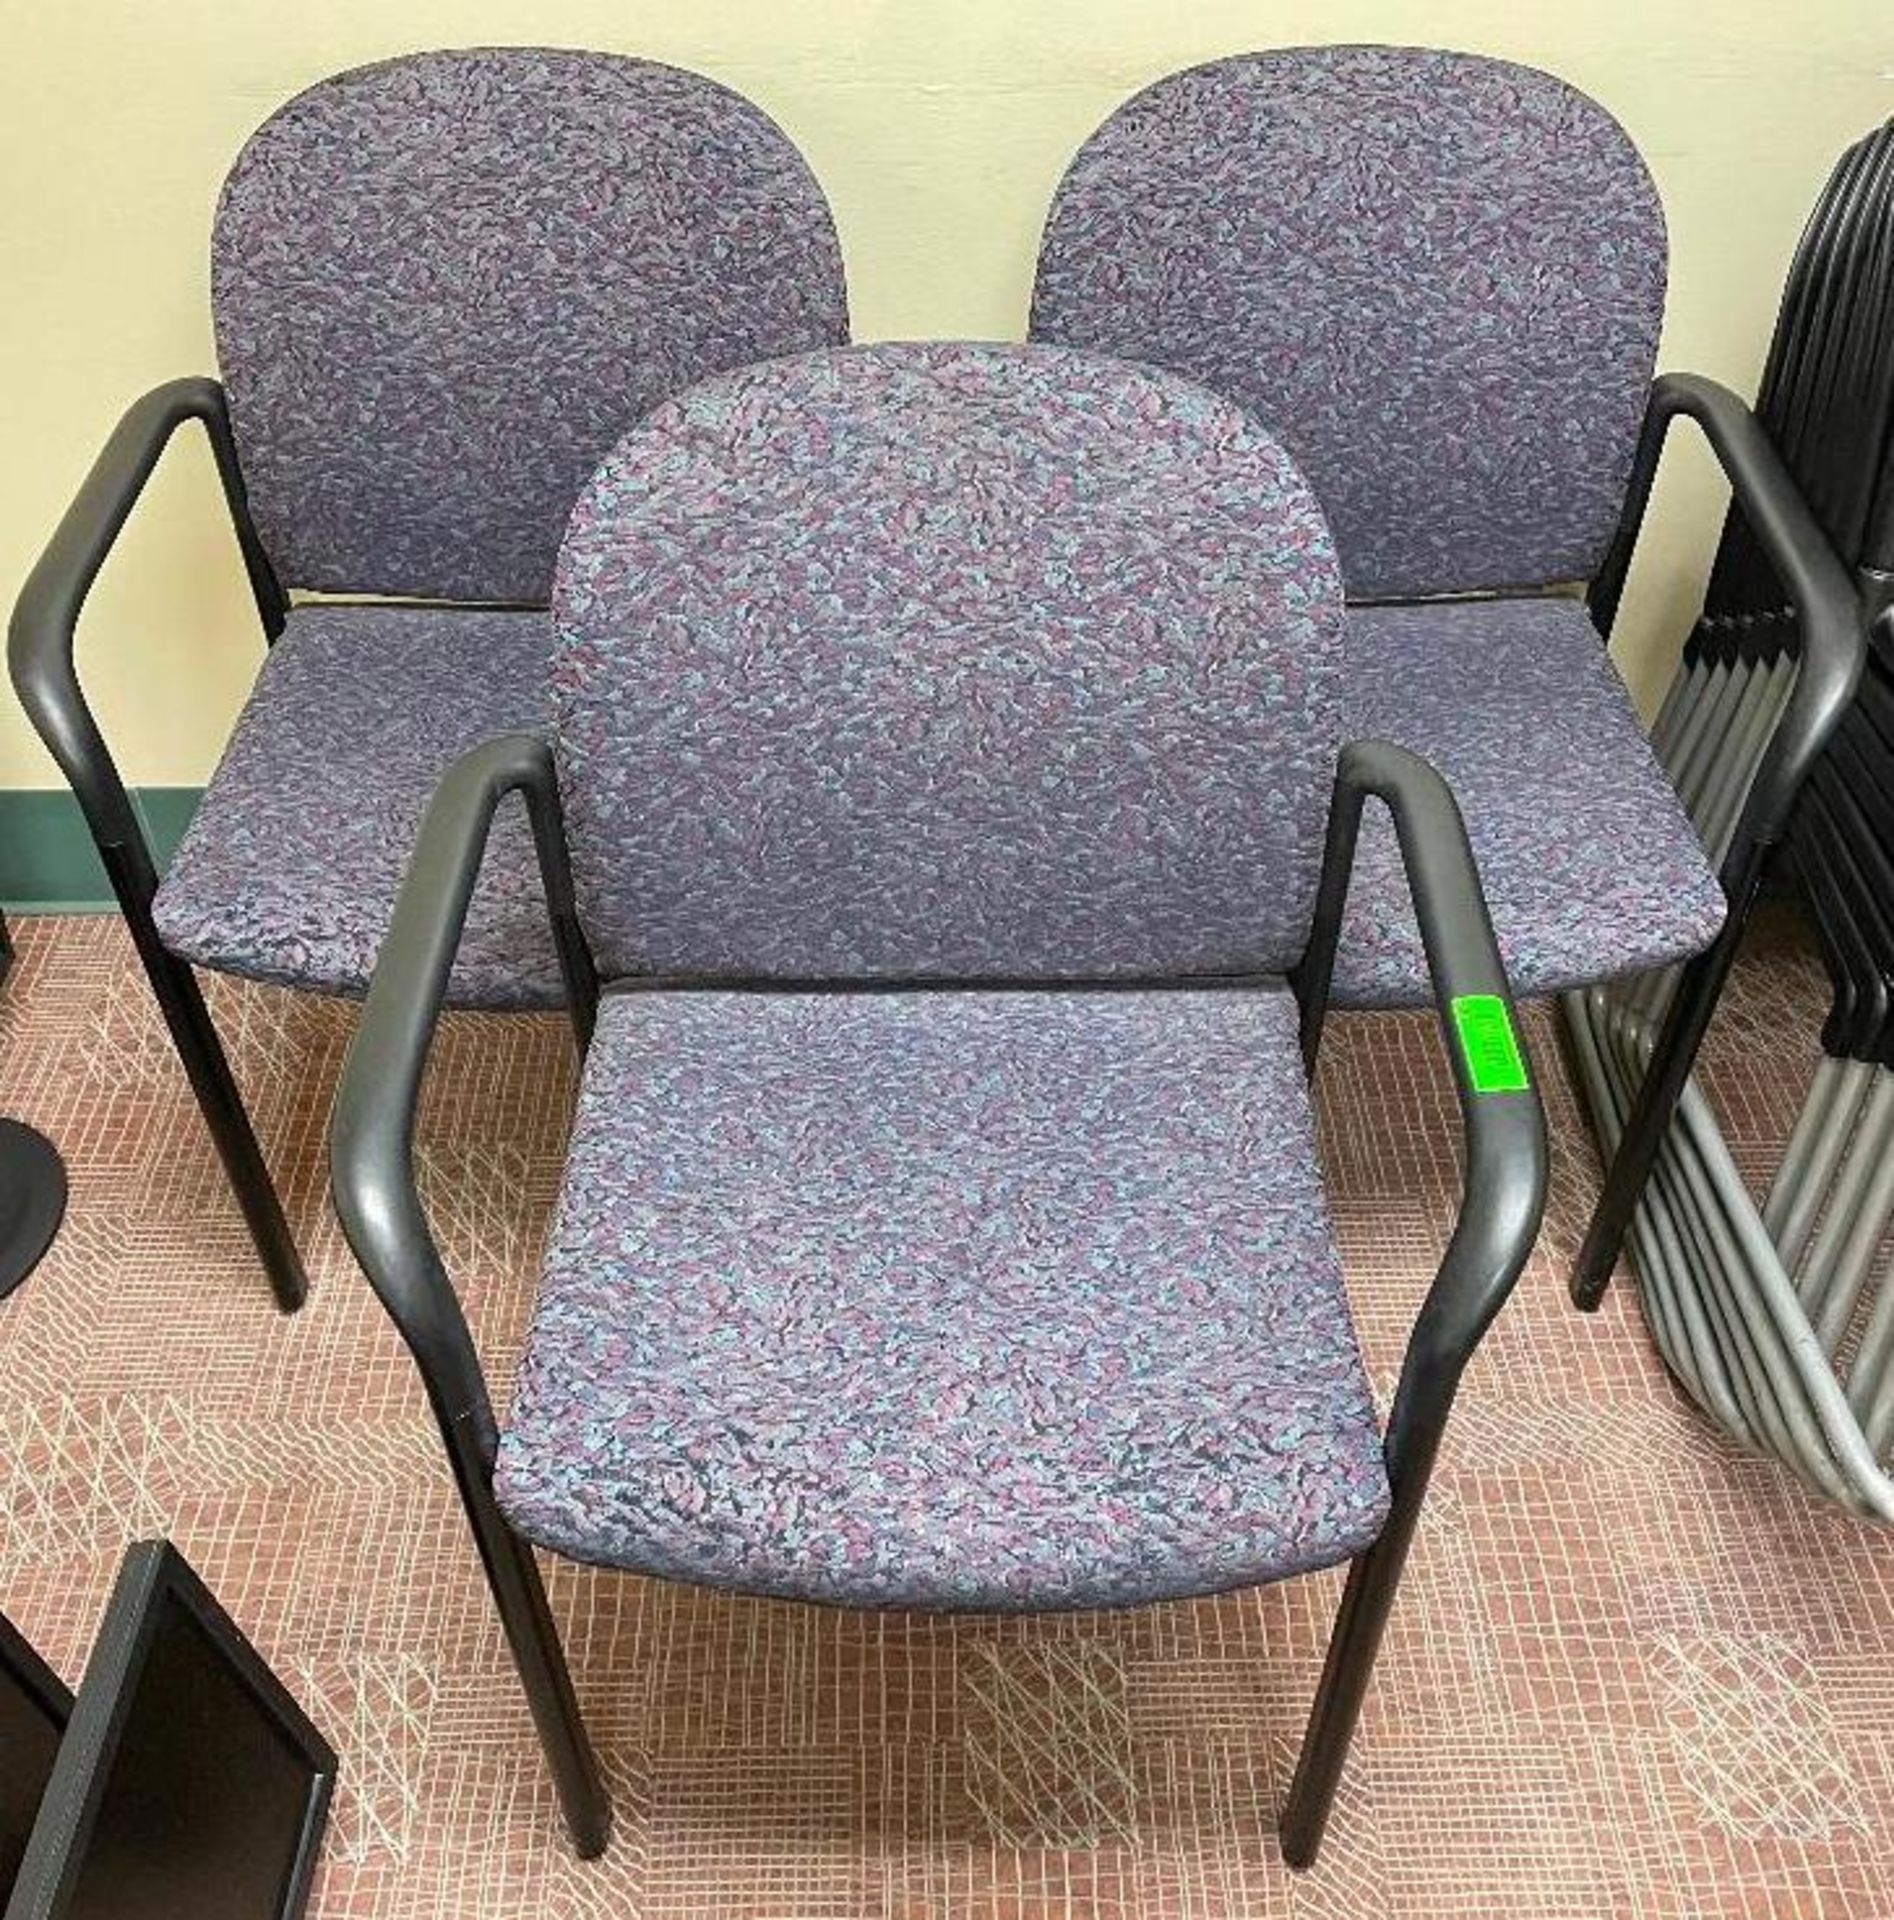 DESCRIPTION (3) METAL FRAMED ARM CHAIRS LOCATION ROOM 21: (GROUP ROOM) THIS LOT IS ONE MONEY QUANTIT